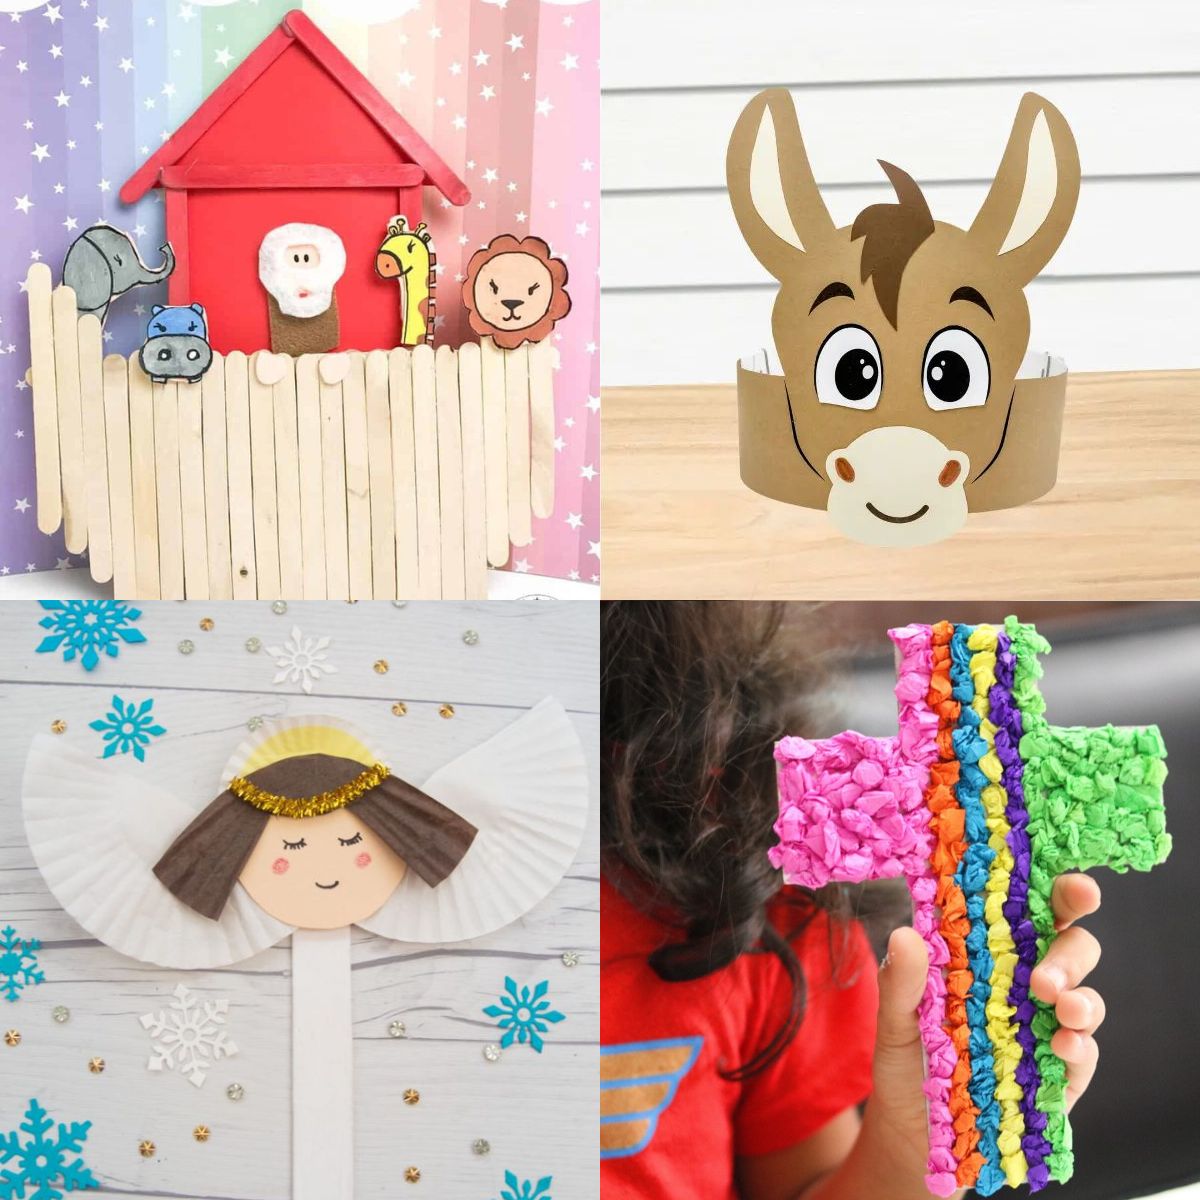 25 EASY Christian Crafts for Kids of All Ages - Christian Camp Pro